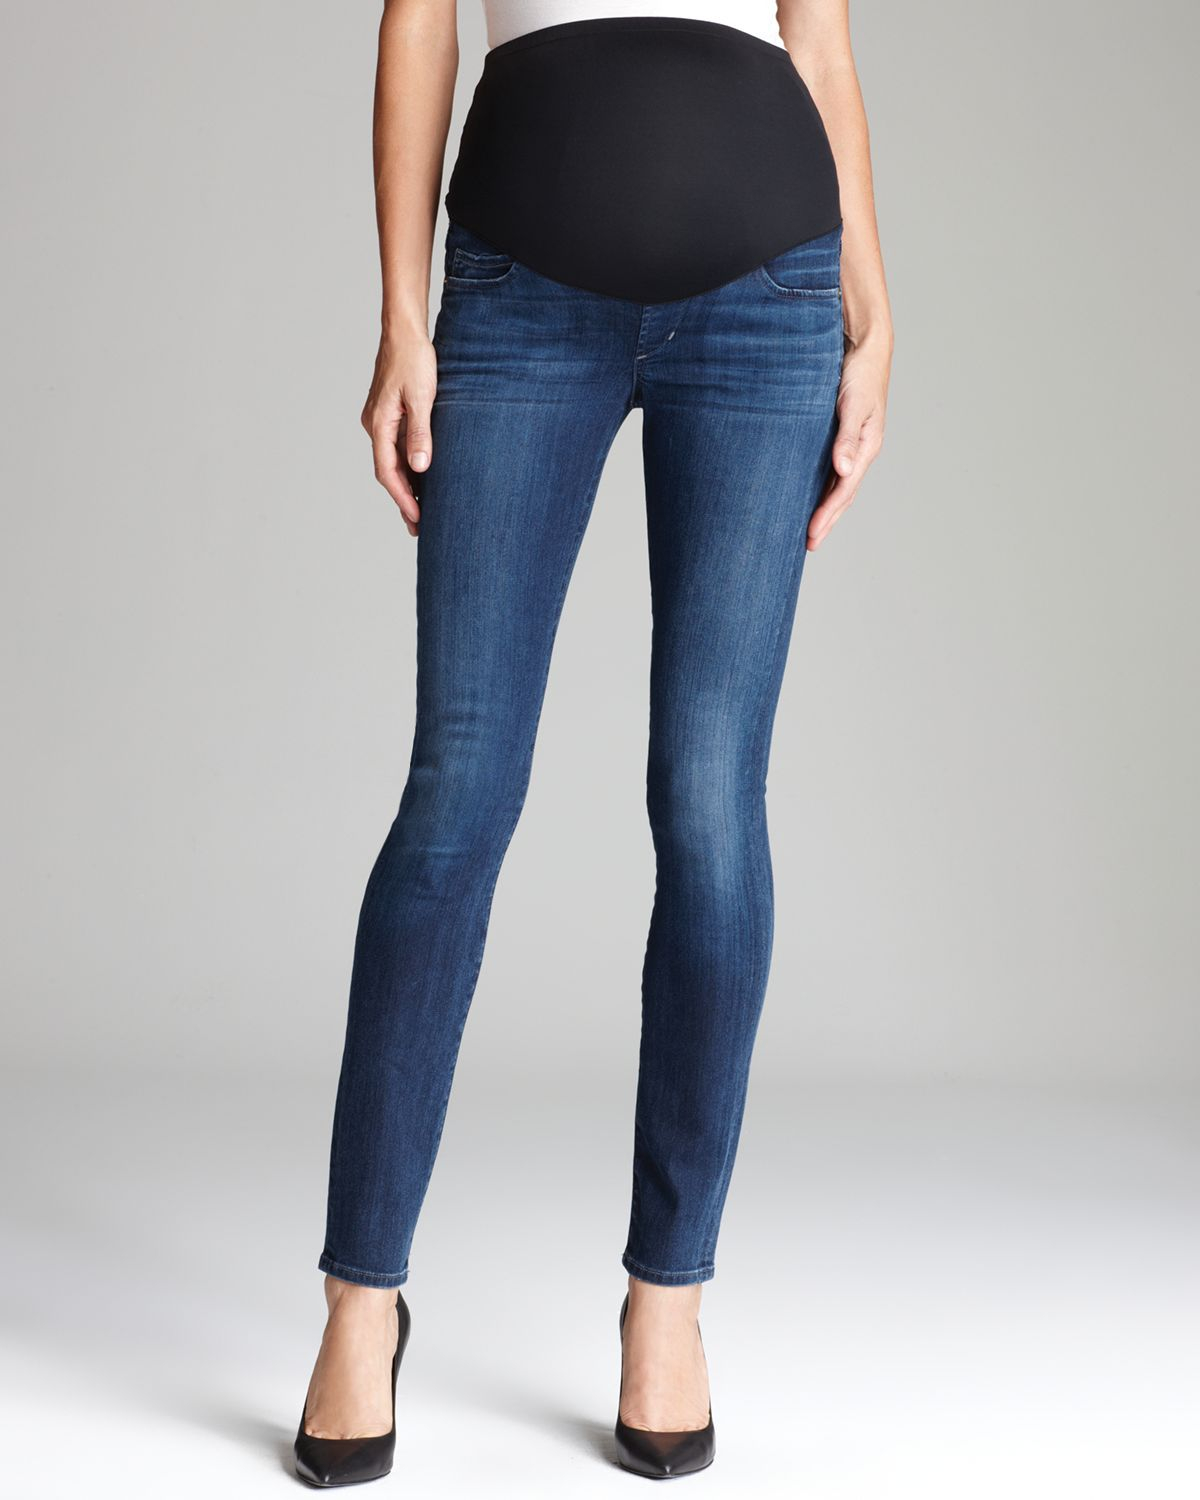 citizens of humanity blue jeans maternity avedon skinny in secret product 1 16323268 1 212480494 normal